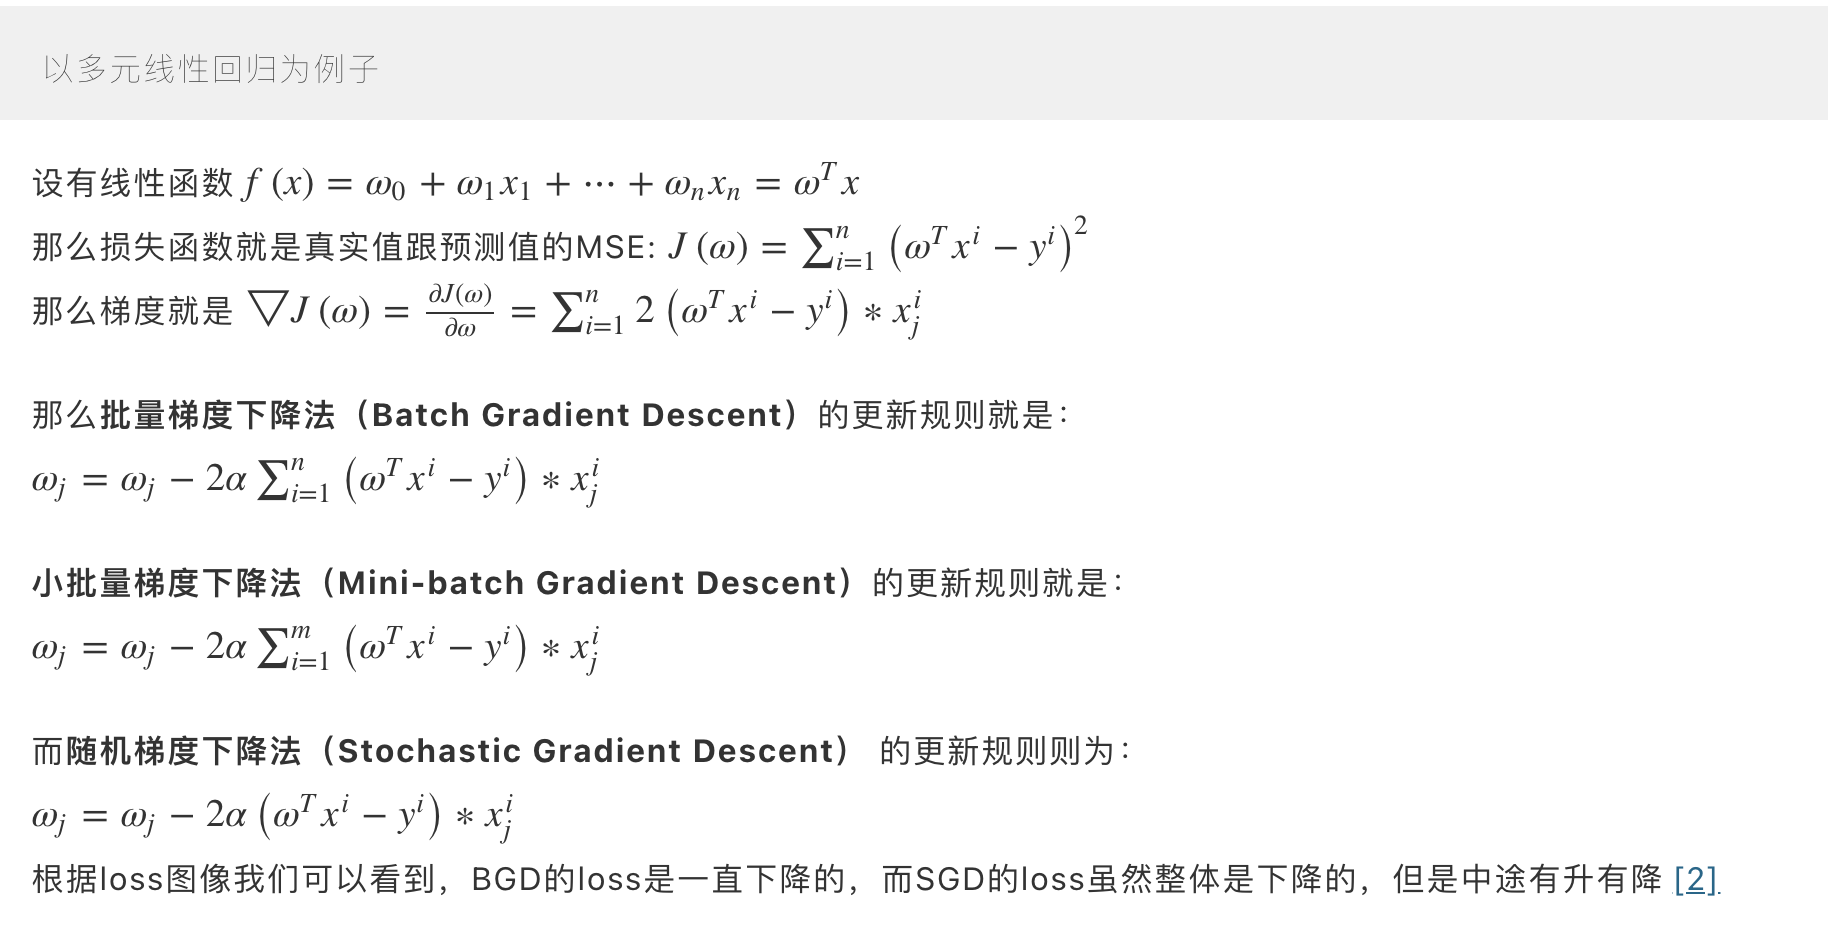 WDK李宏毅学习笔记第十八周01_Meta learning-MAML and Gradient descent as LSTM_maml ...